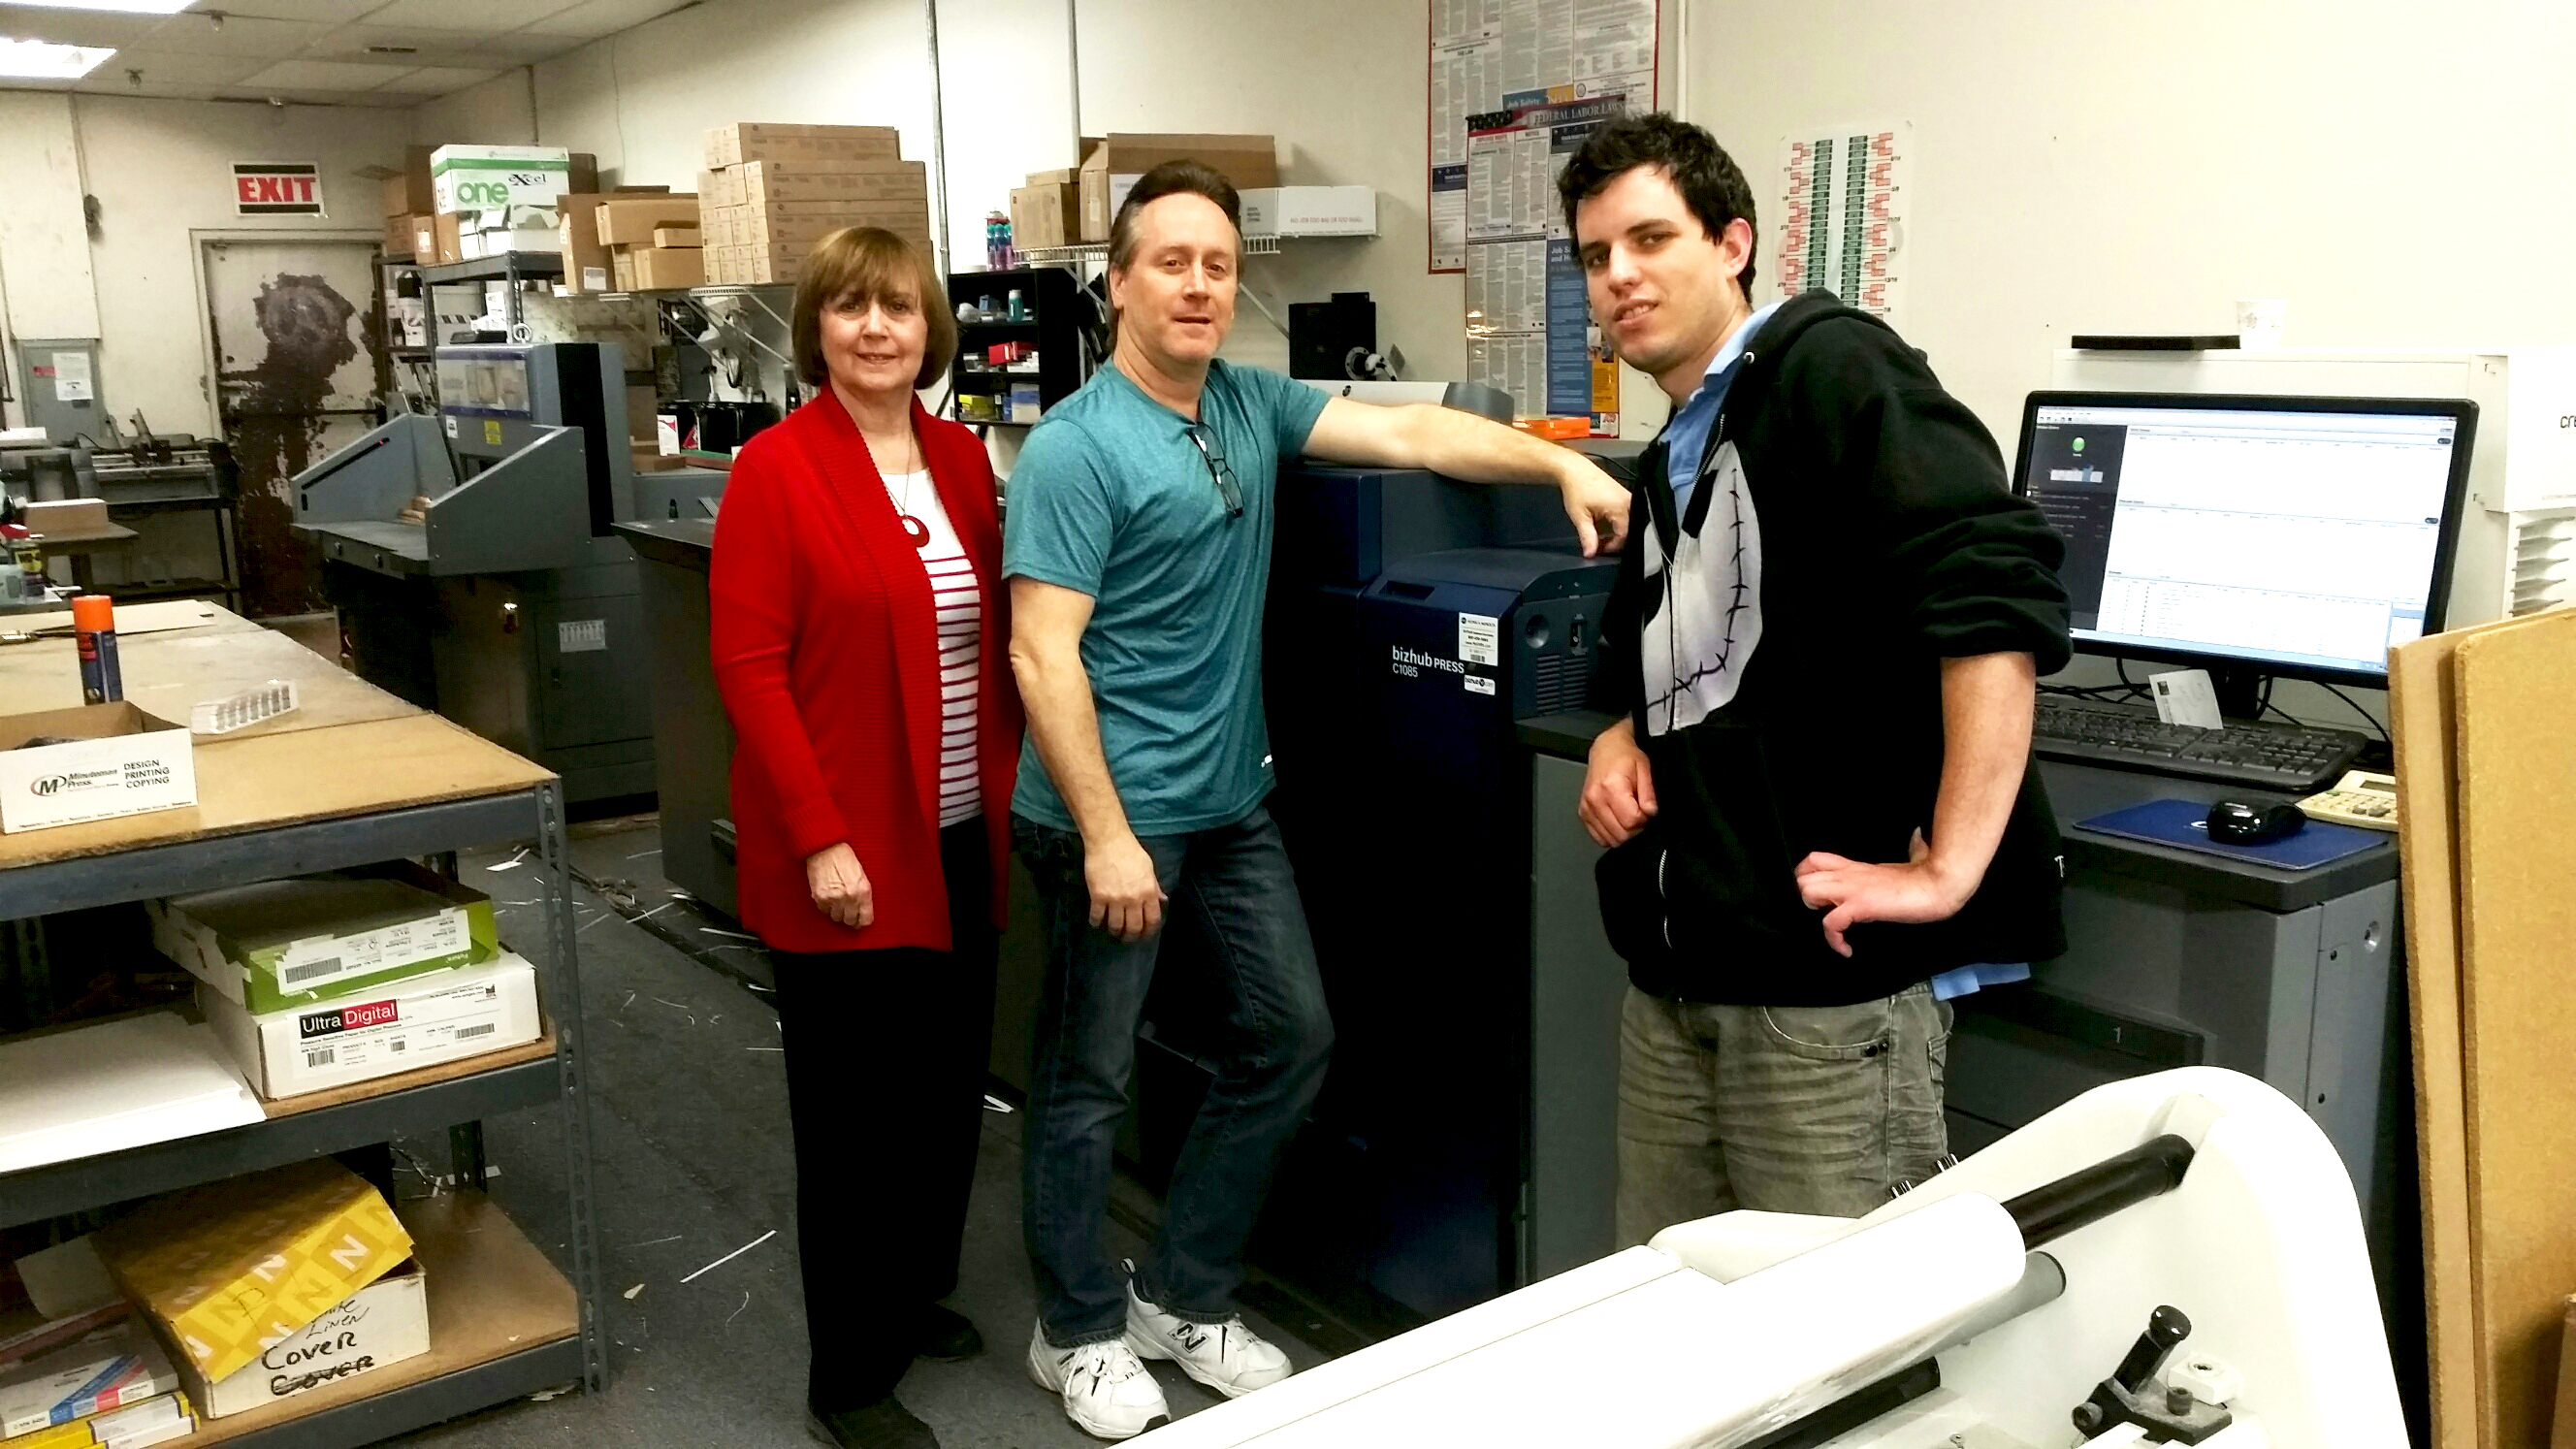 The Minuteman Press franchise in Selden, NY appreciates the speed and efficency of their Konica Minolta C1085 digital press. Pictured from left to right are: Rita Passeggio – Owner, Scott Bomine – Shop Manager, and Miles Mongeau – Graphic Designer